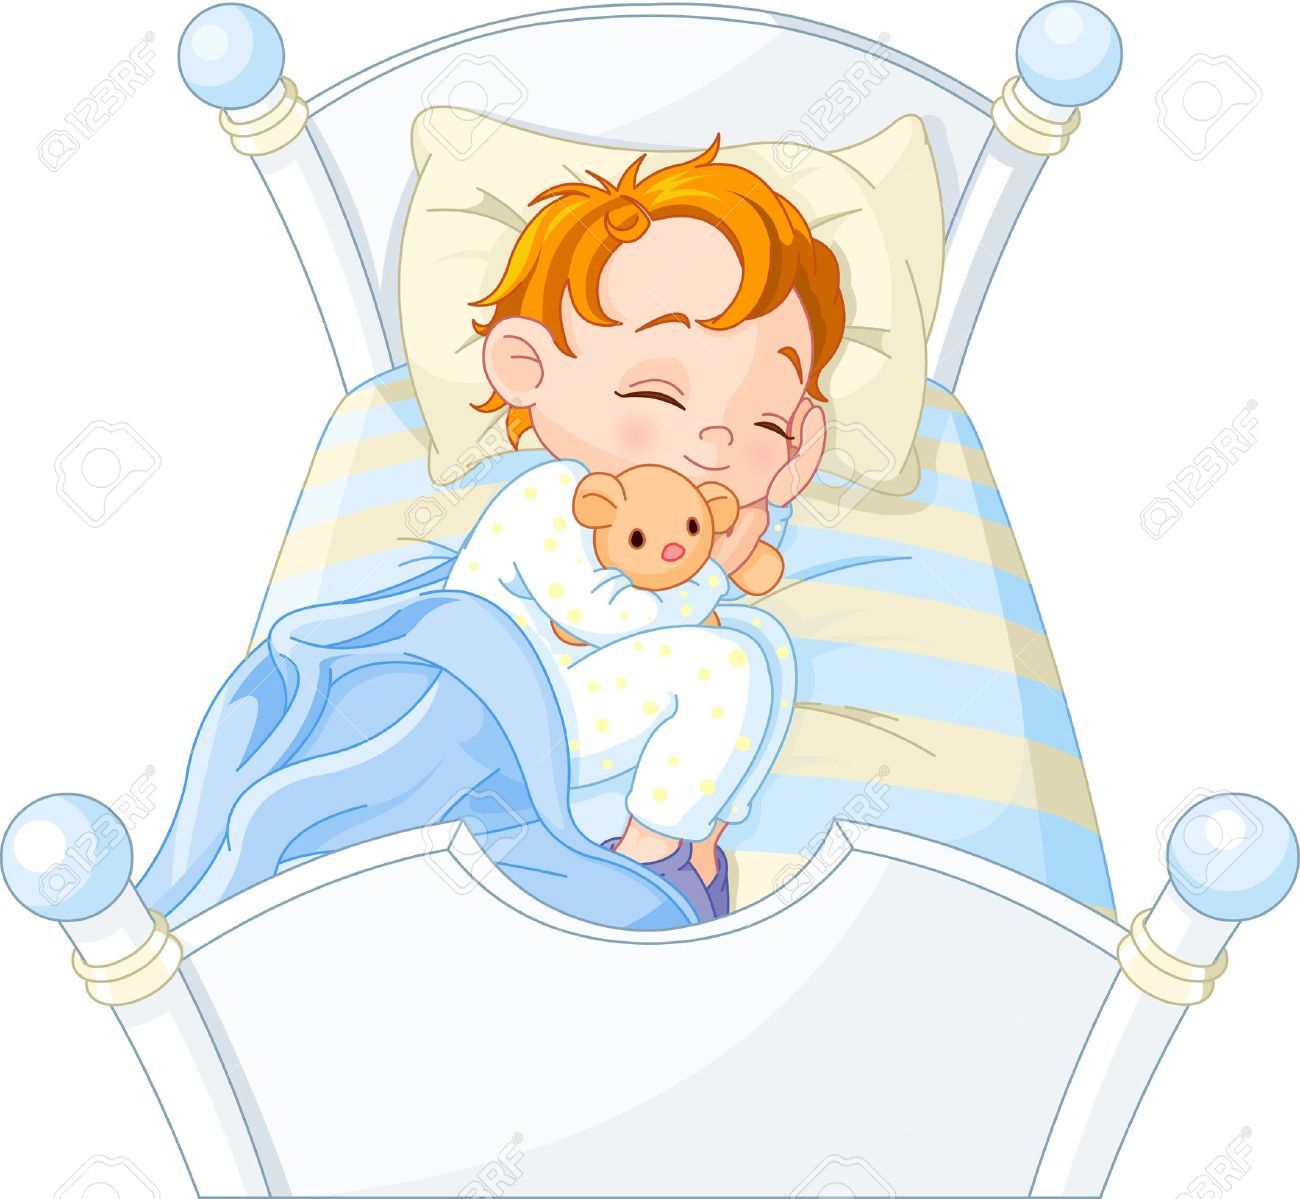 Image result for sleep. Bedtime clipart cozy bed